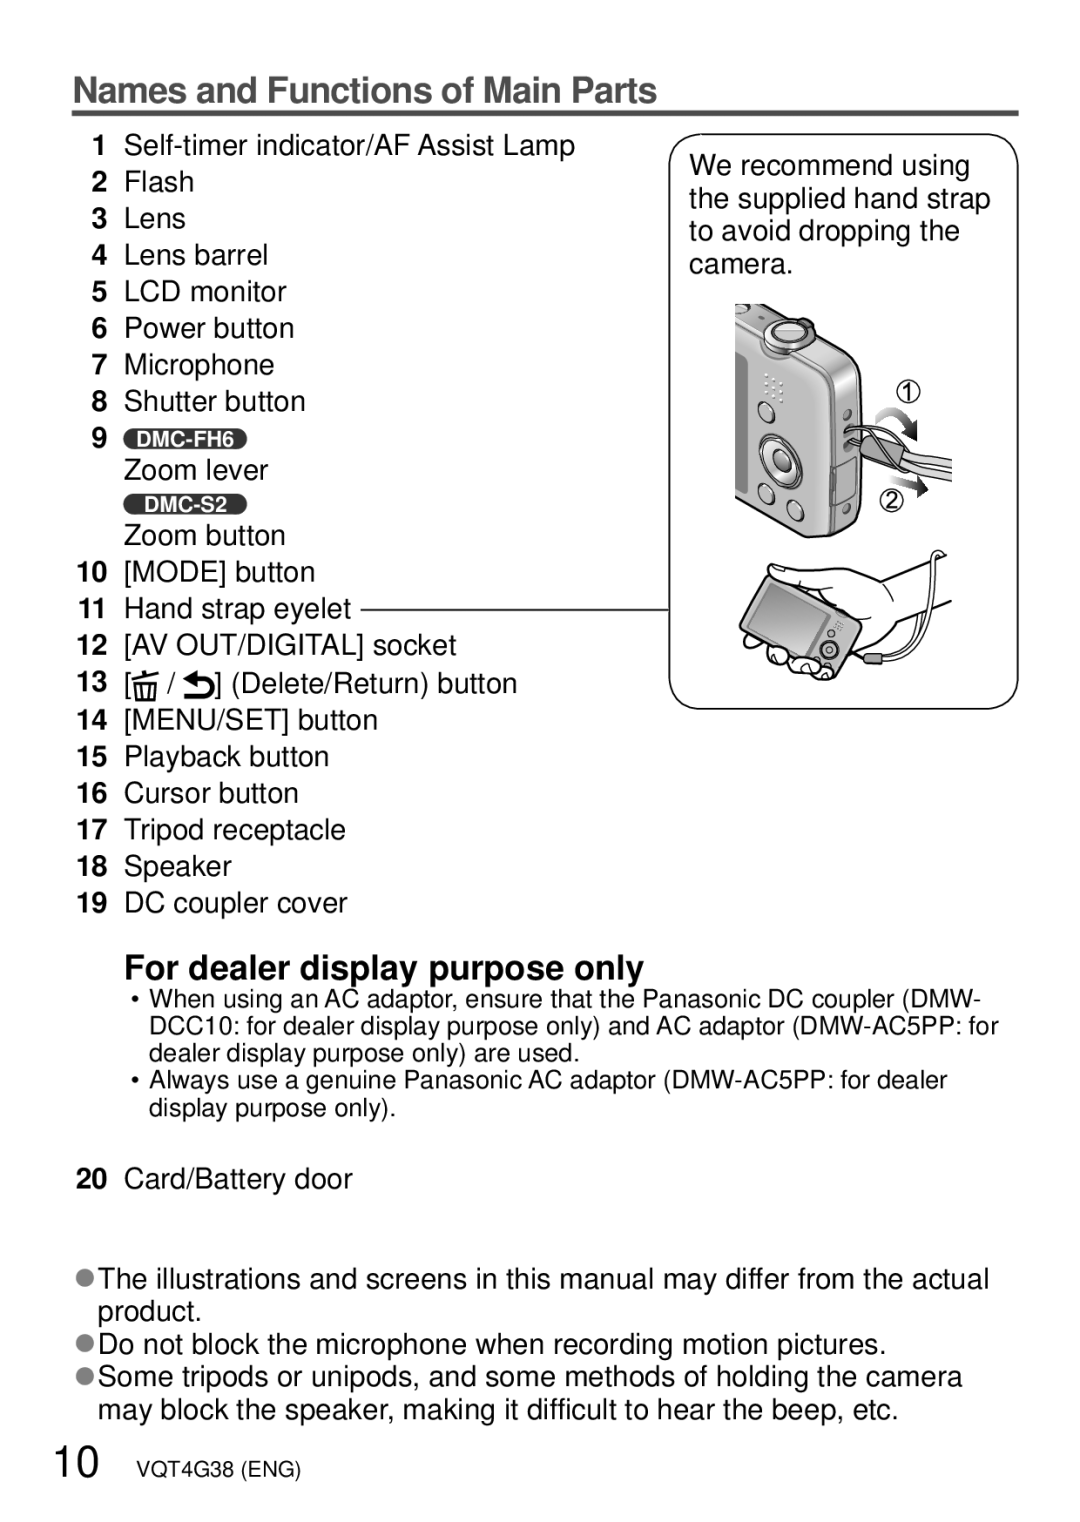 Panasonic DMC-S2V, DMC-S2K, DMC-FH6K, M1211KZ0, VQT4G38 Names and Functions of Main Parts, For dealer display purpose only 